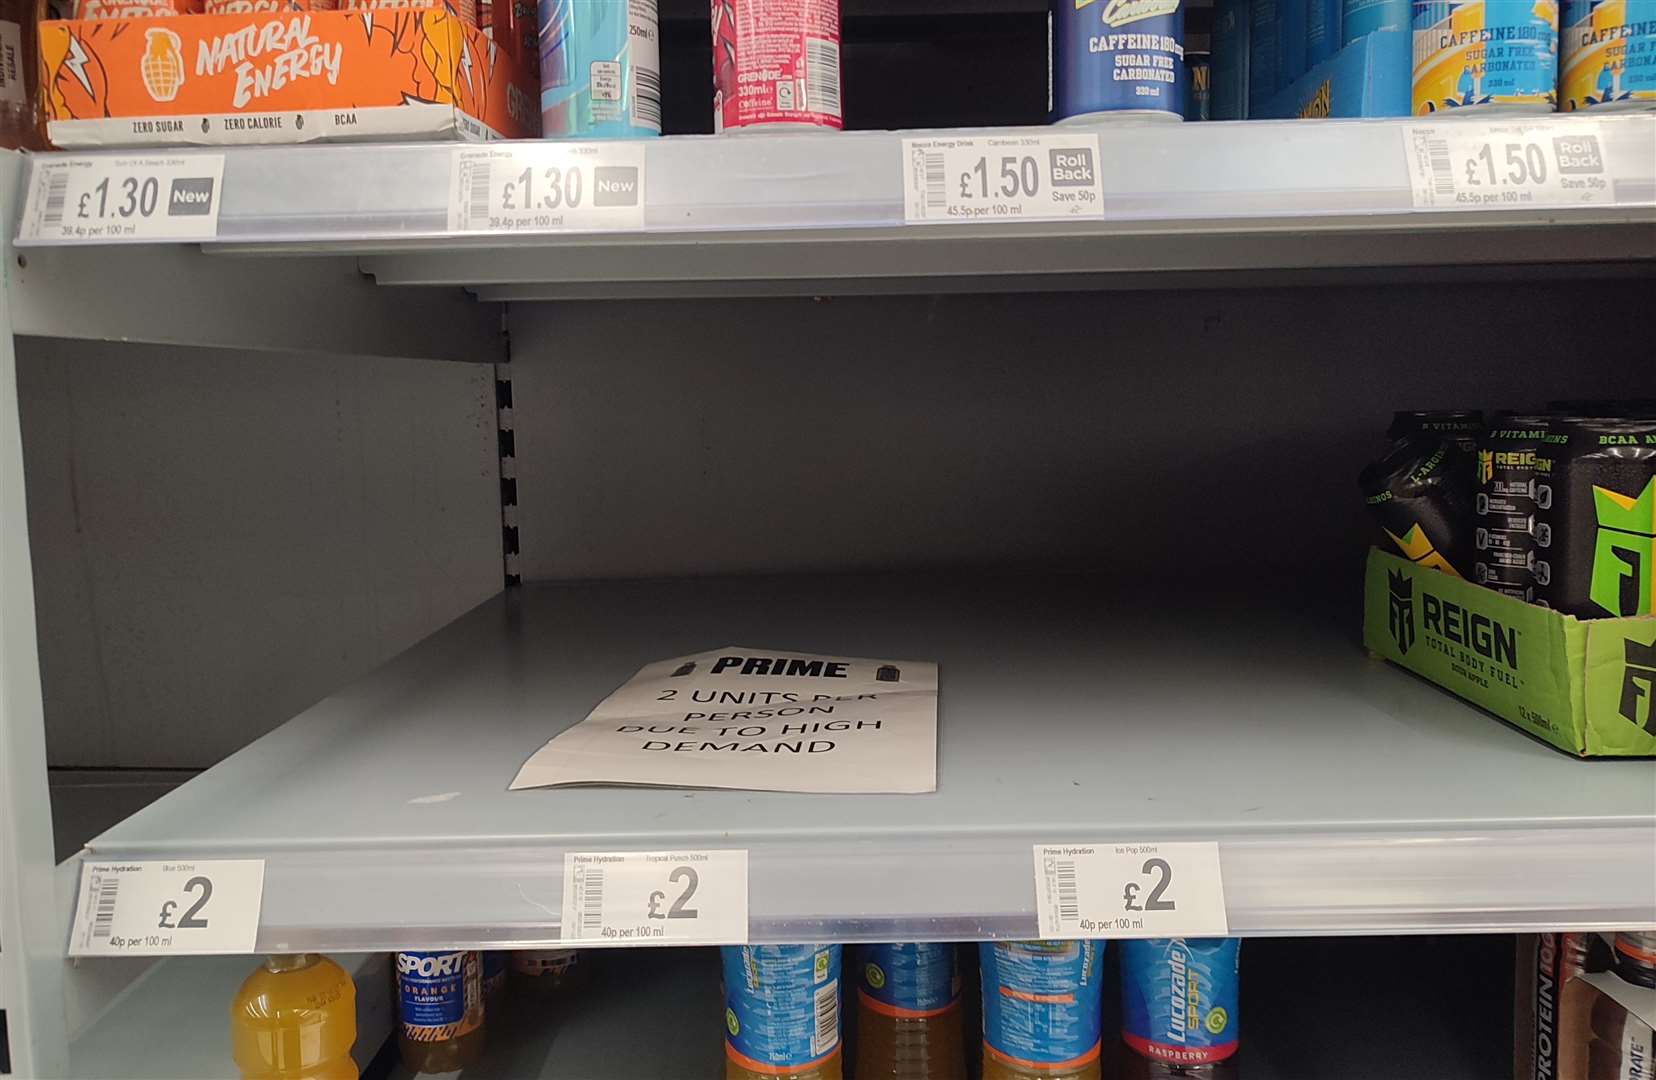 Asda's shelves were stripped of the drink